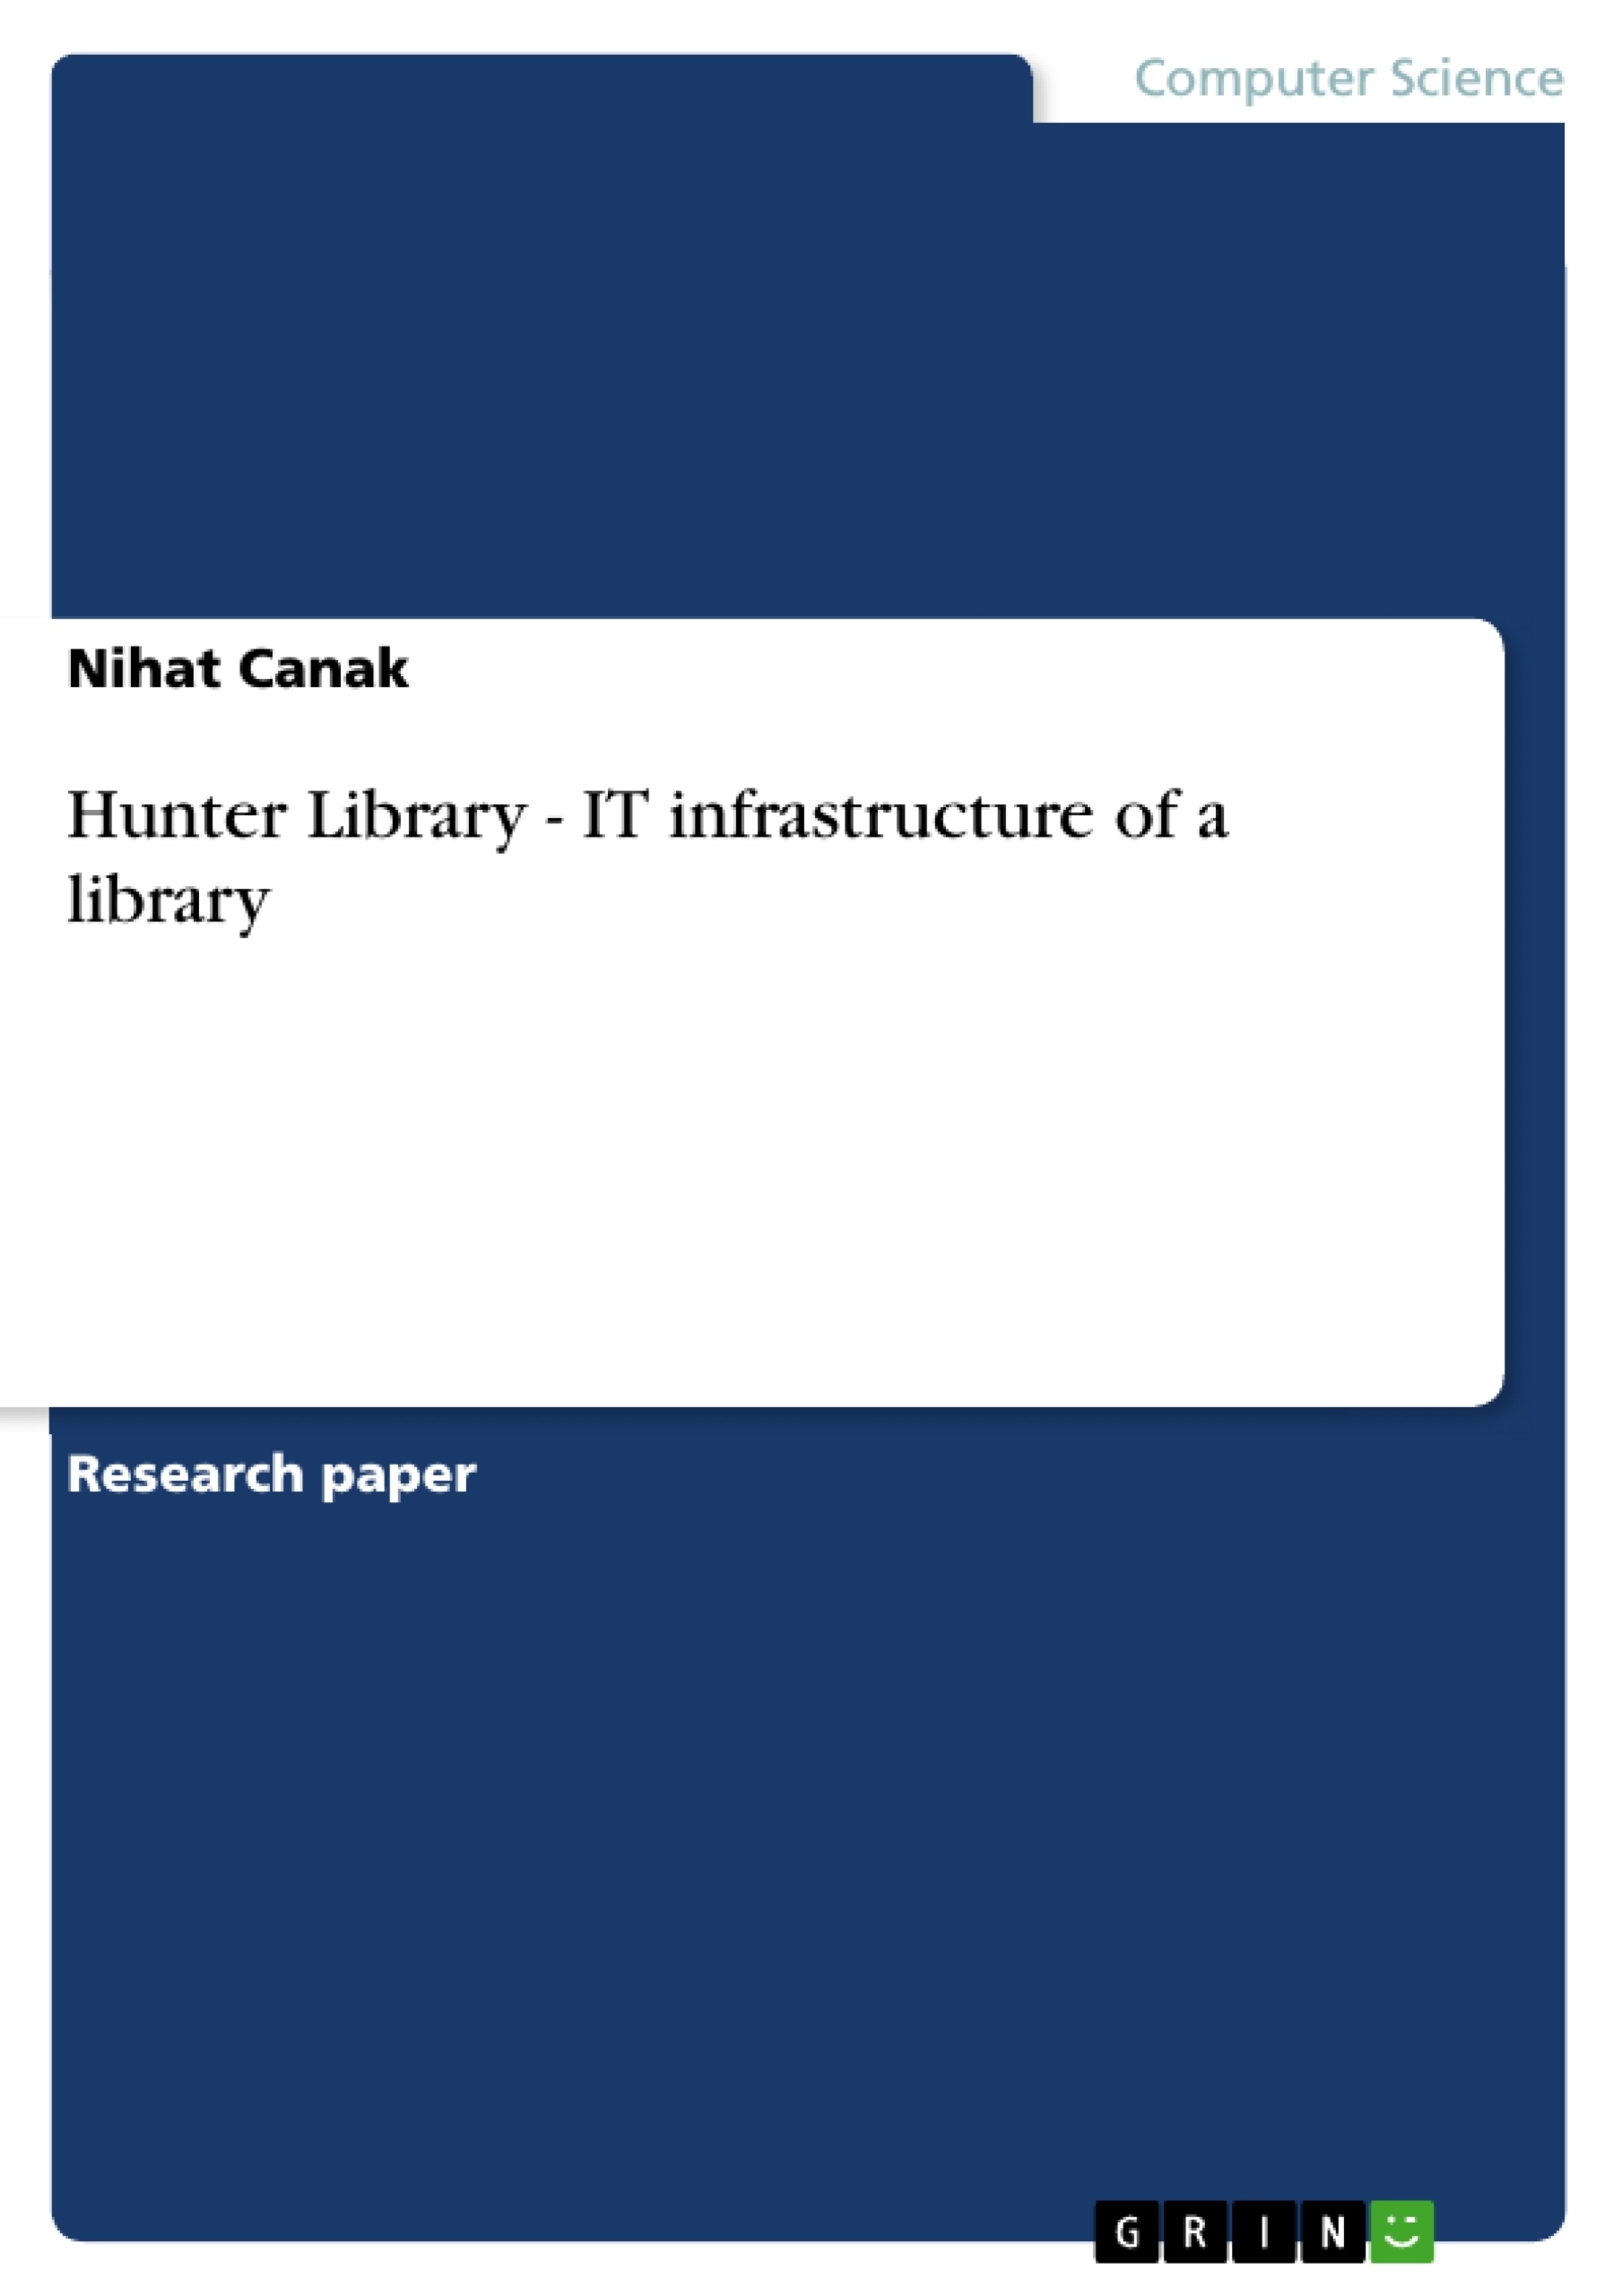 Titre: Hunter Library - IT infrastructure of a library